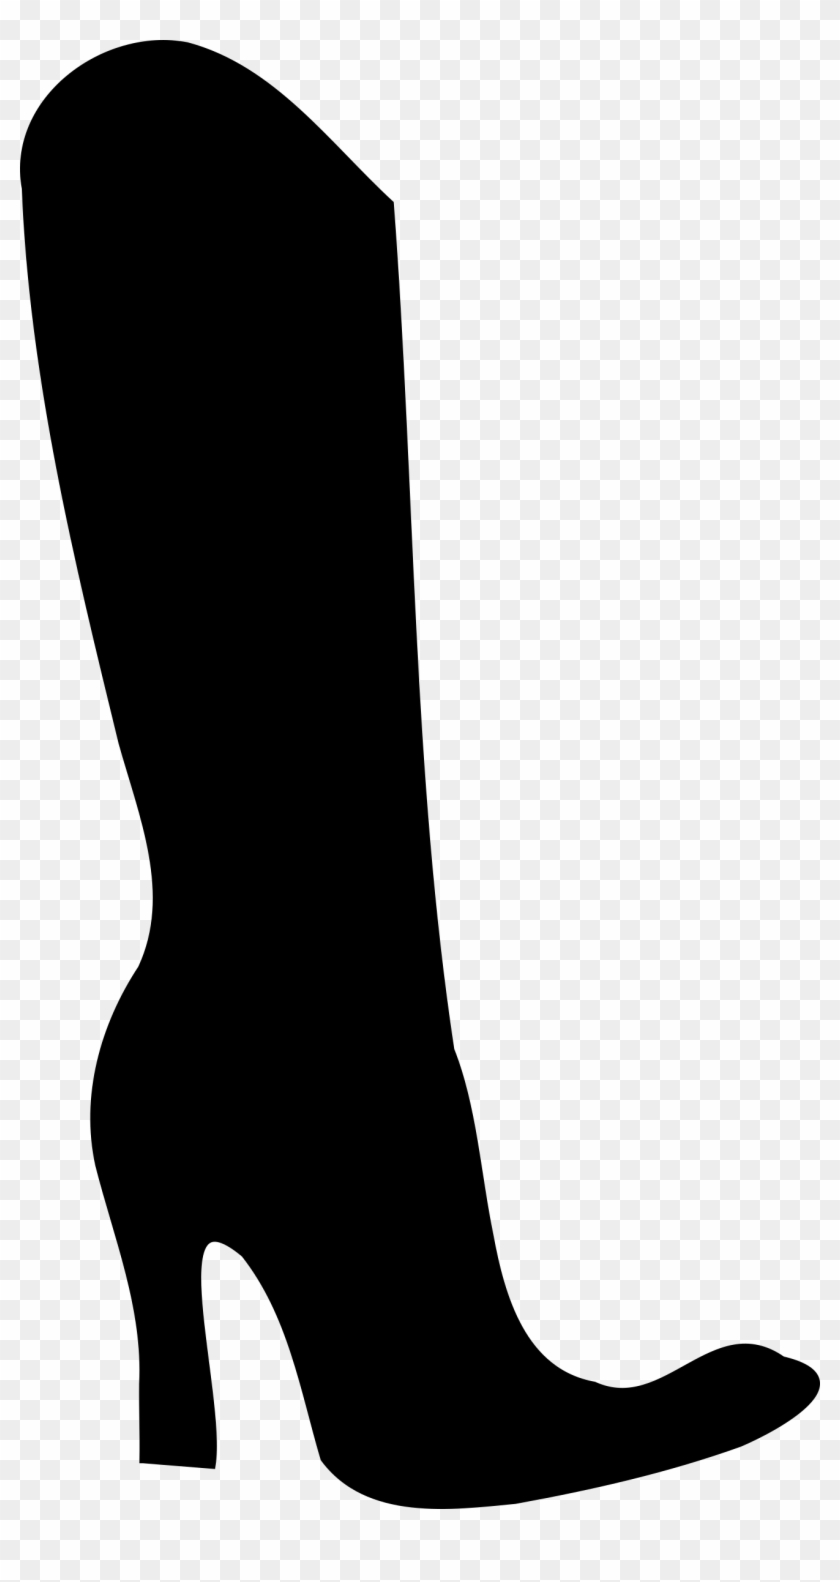 Shoe Silhouette Clip Art - Boot Silhouette Png #248096